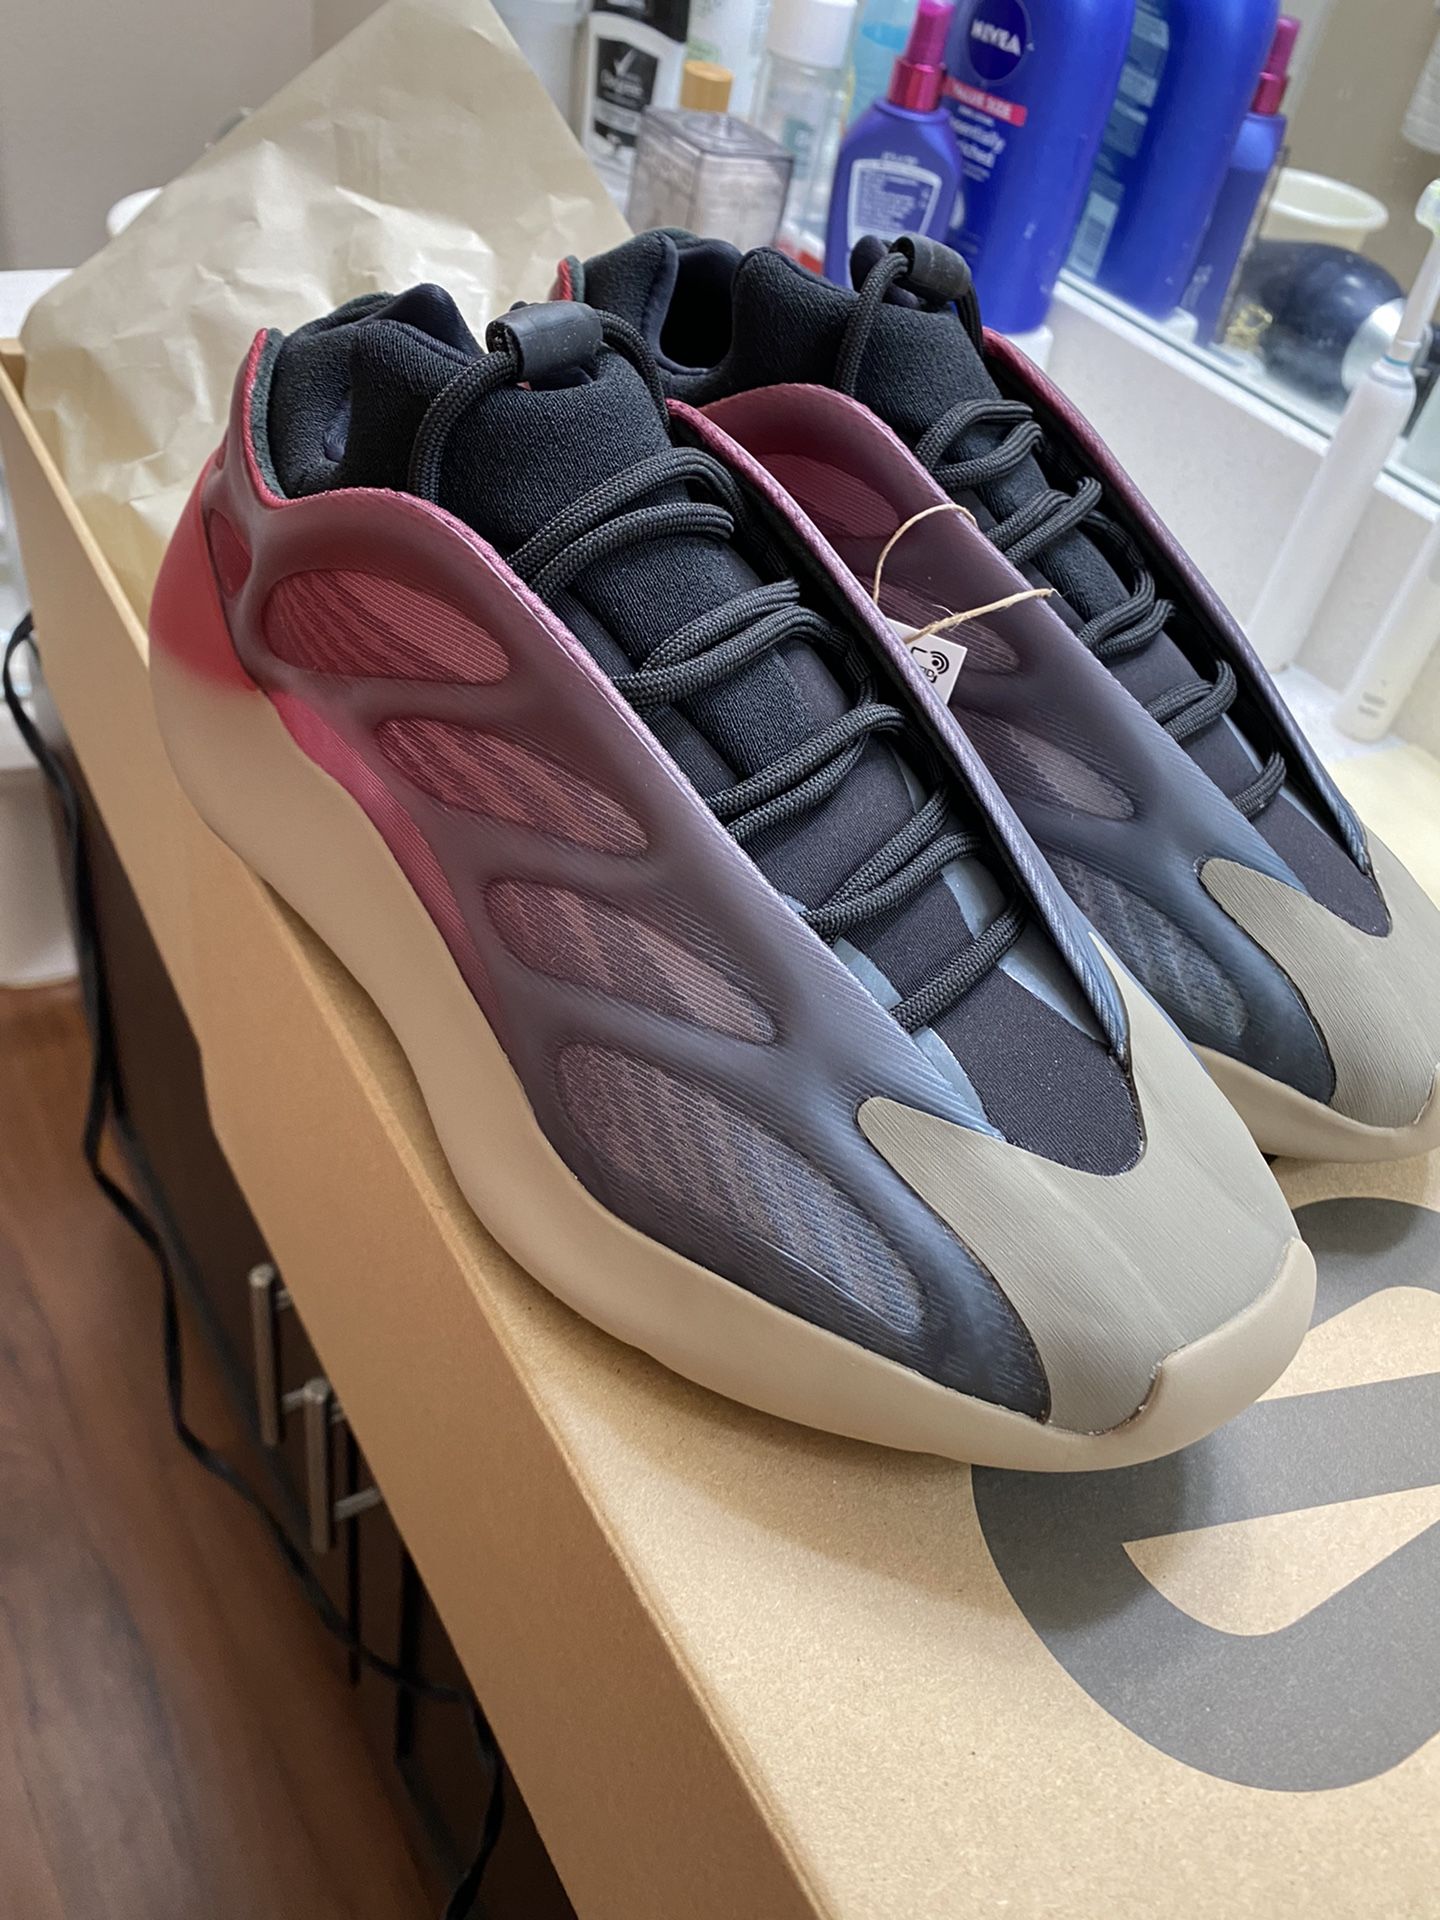 Yeezy 700 V3 Fade Size 10